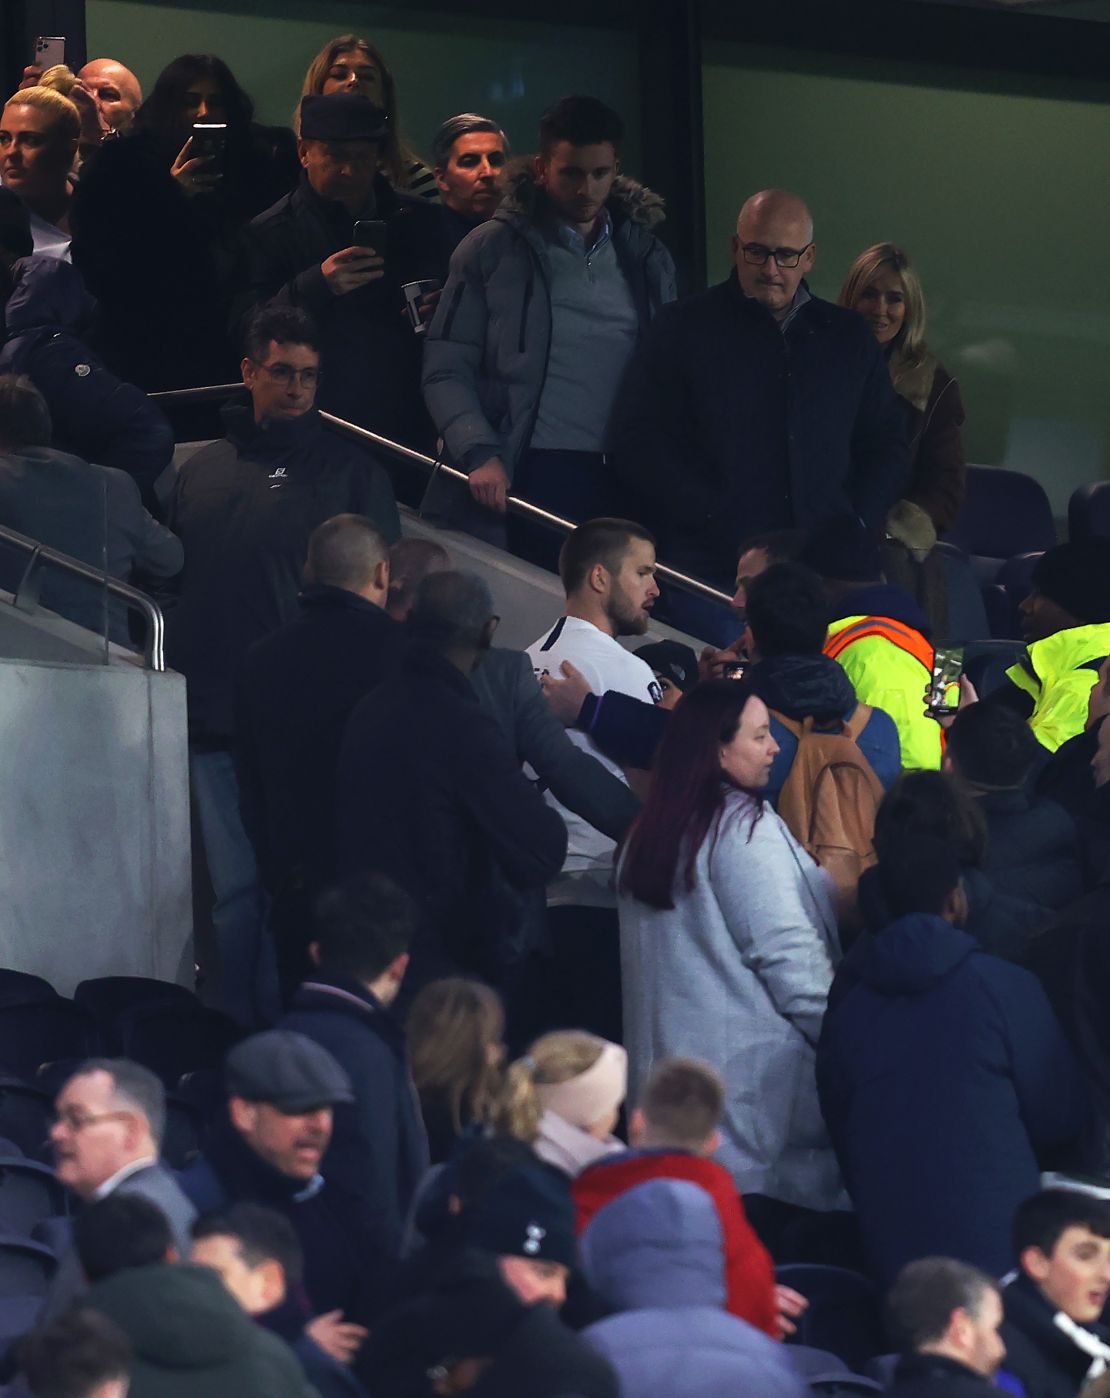 Eric Dier is led away by security after confronting a Tottenham fan following his side's FA Cup defeat. 